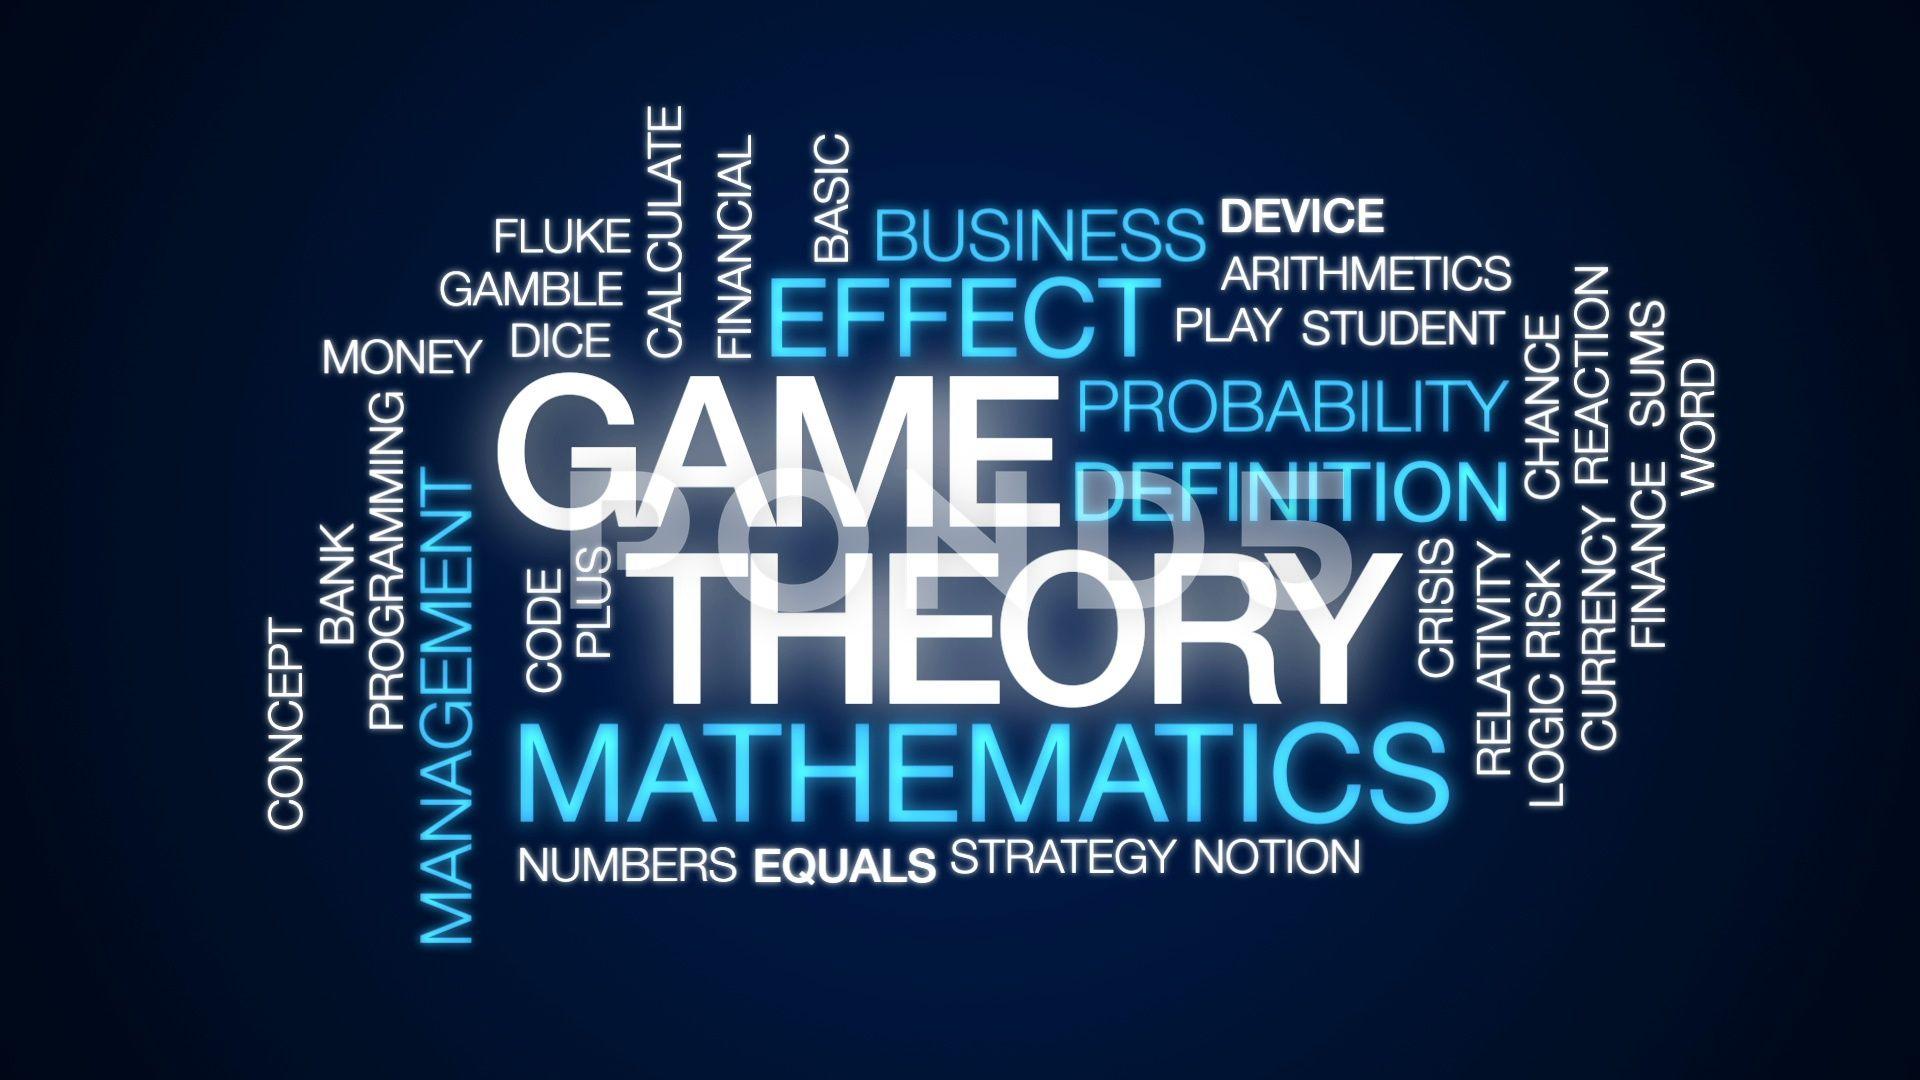 HS402 - Game Theory and Economic Analysis